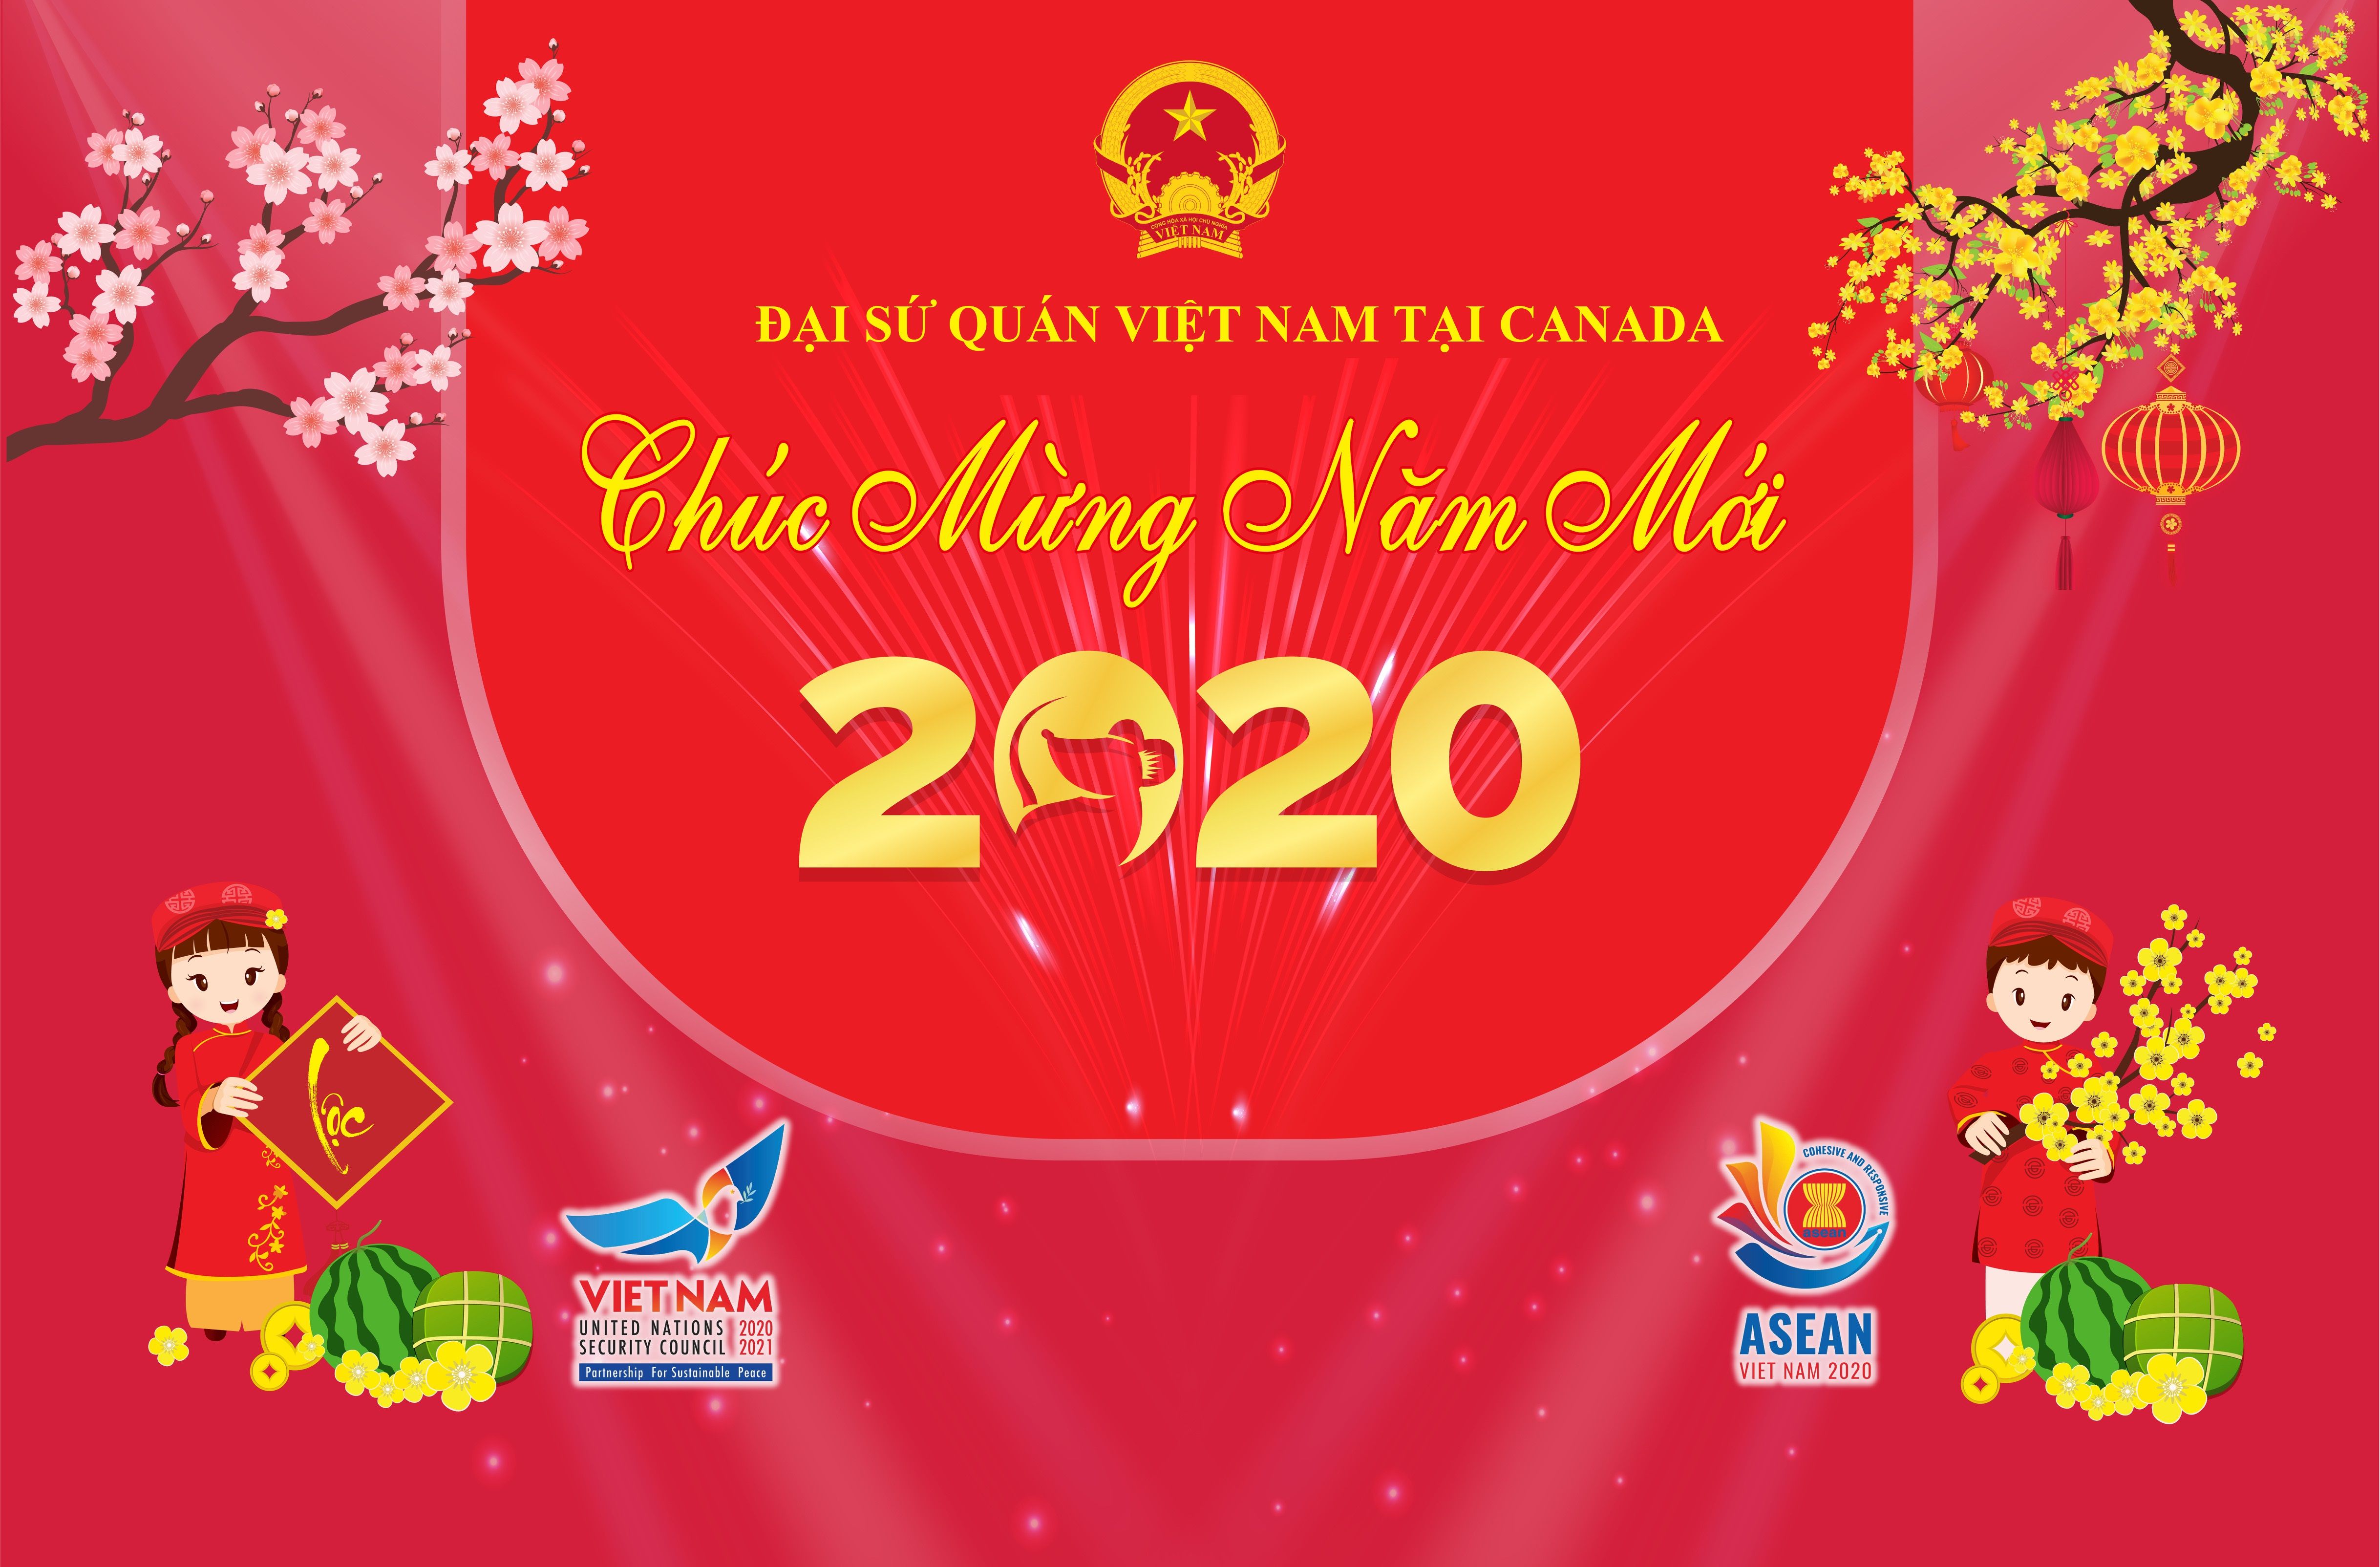 Vietnam Embassy in Canada: ONLY OFFICIAL website for visas